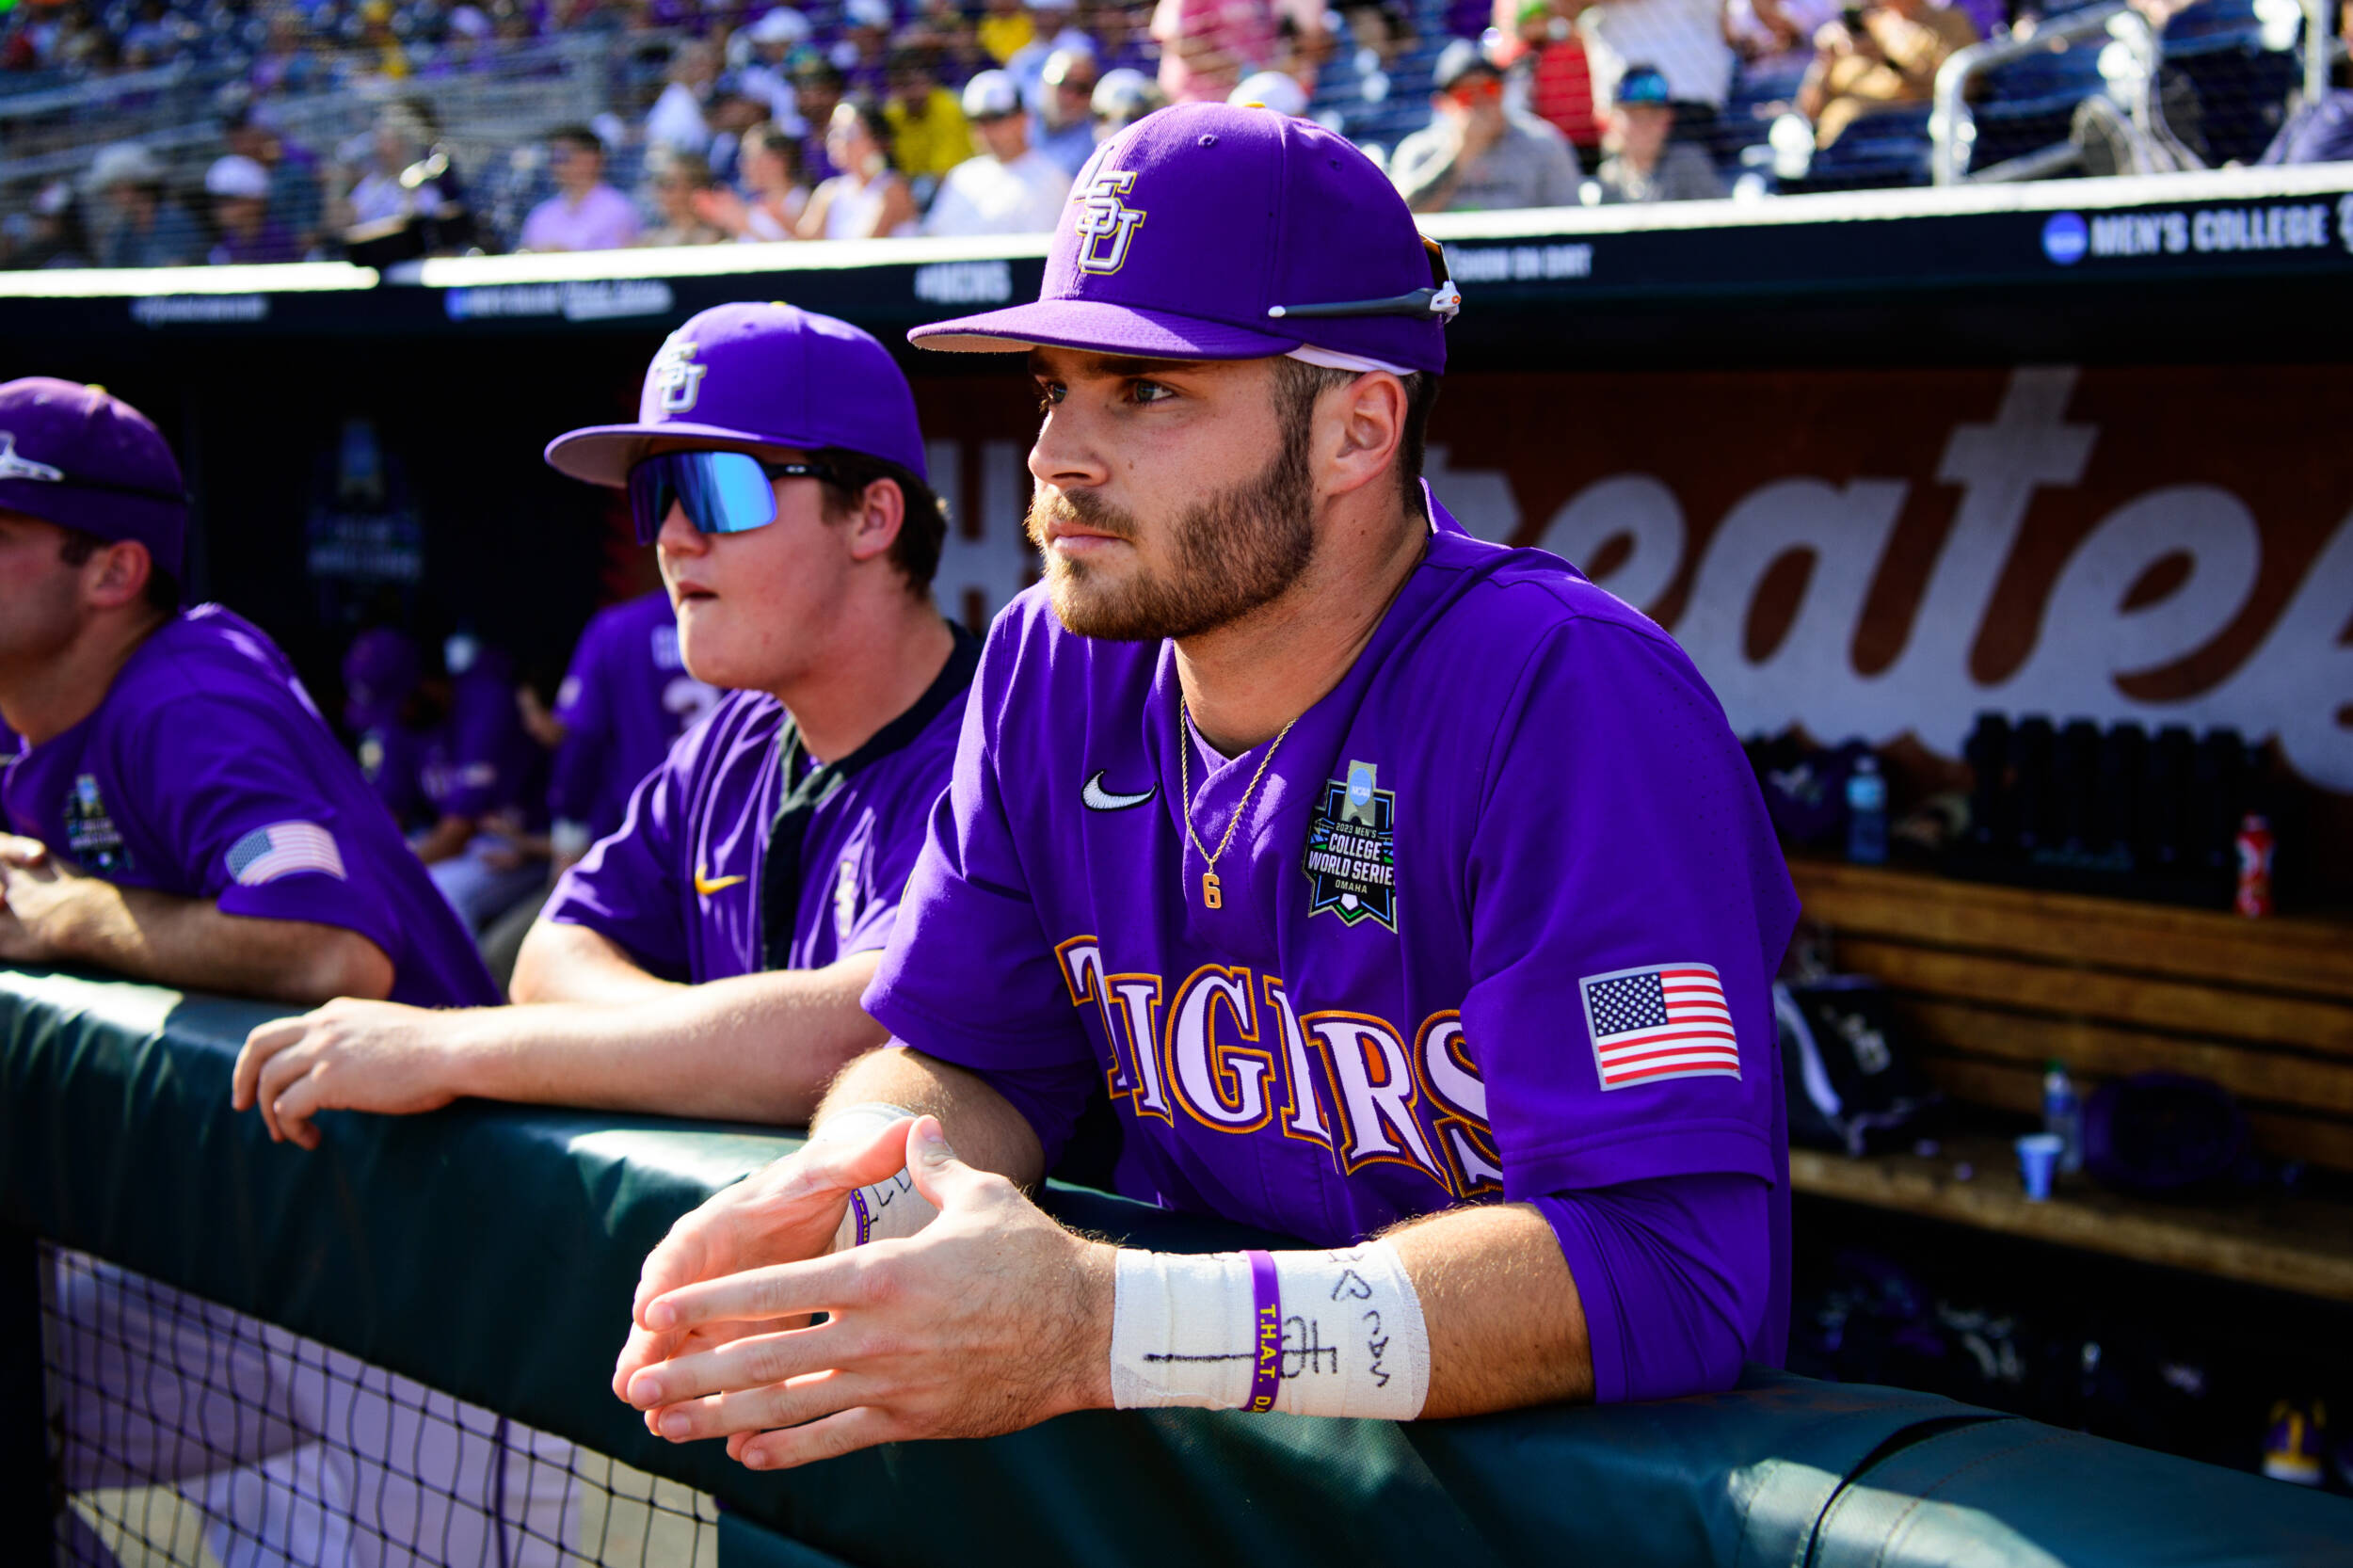 New Orleans natives lead LSU to College World Series championship